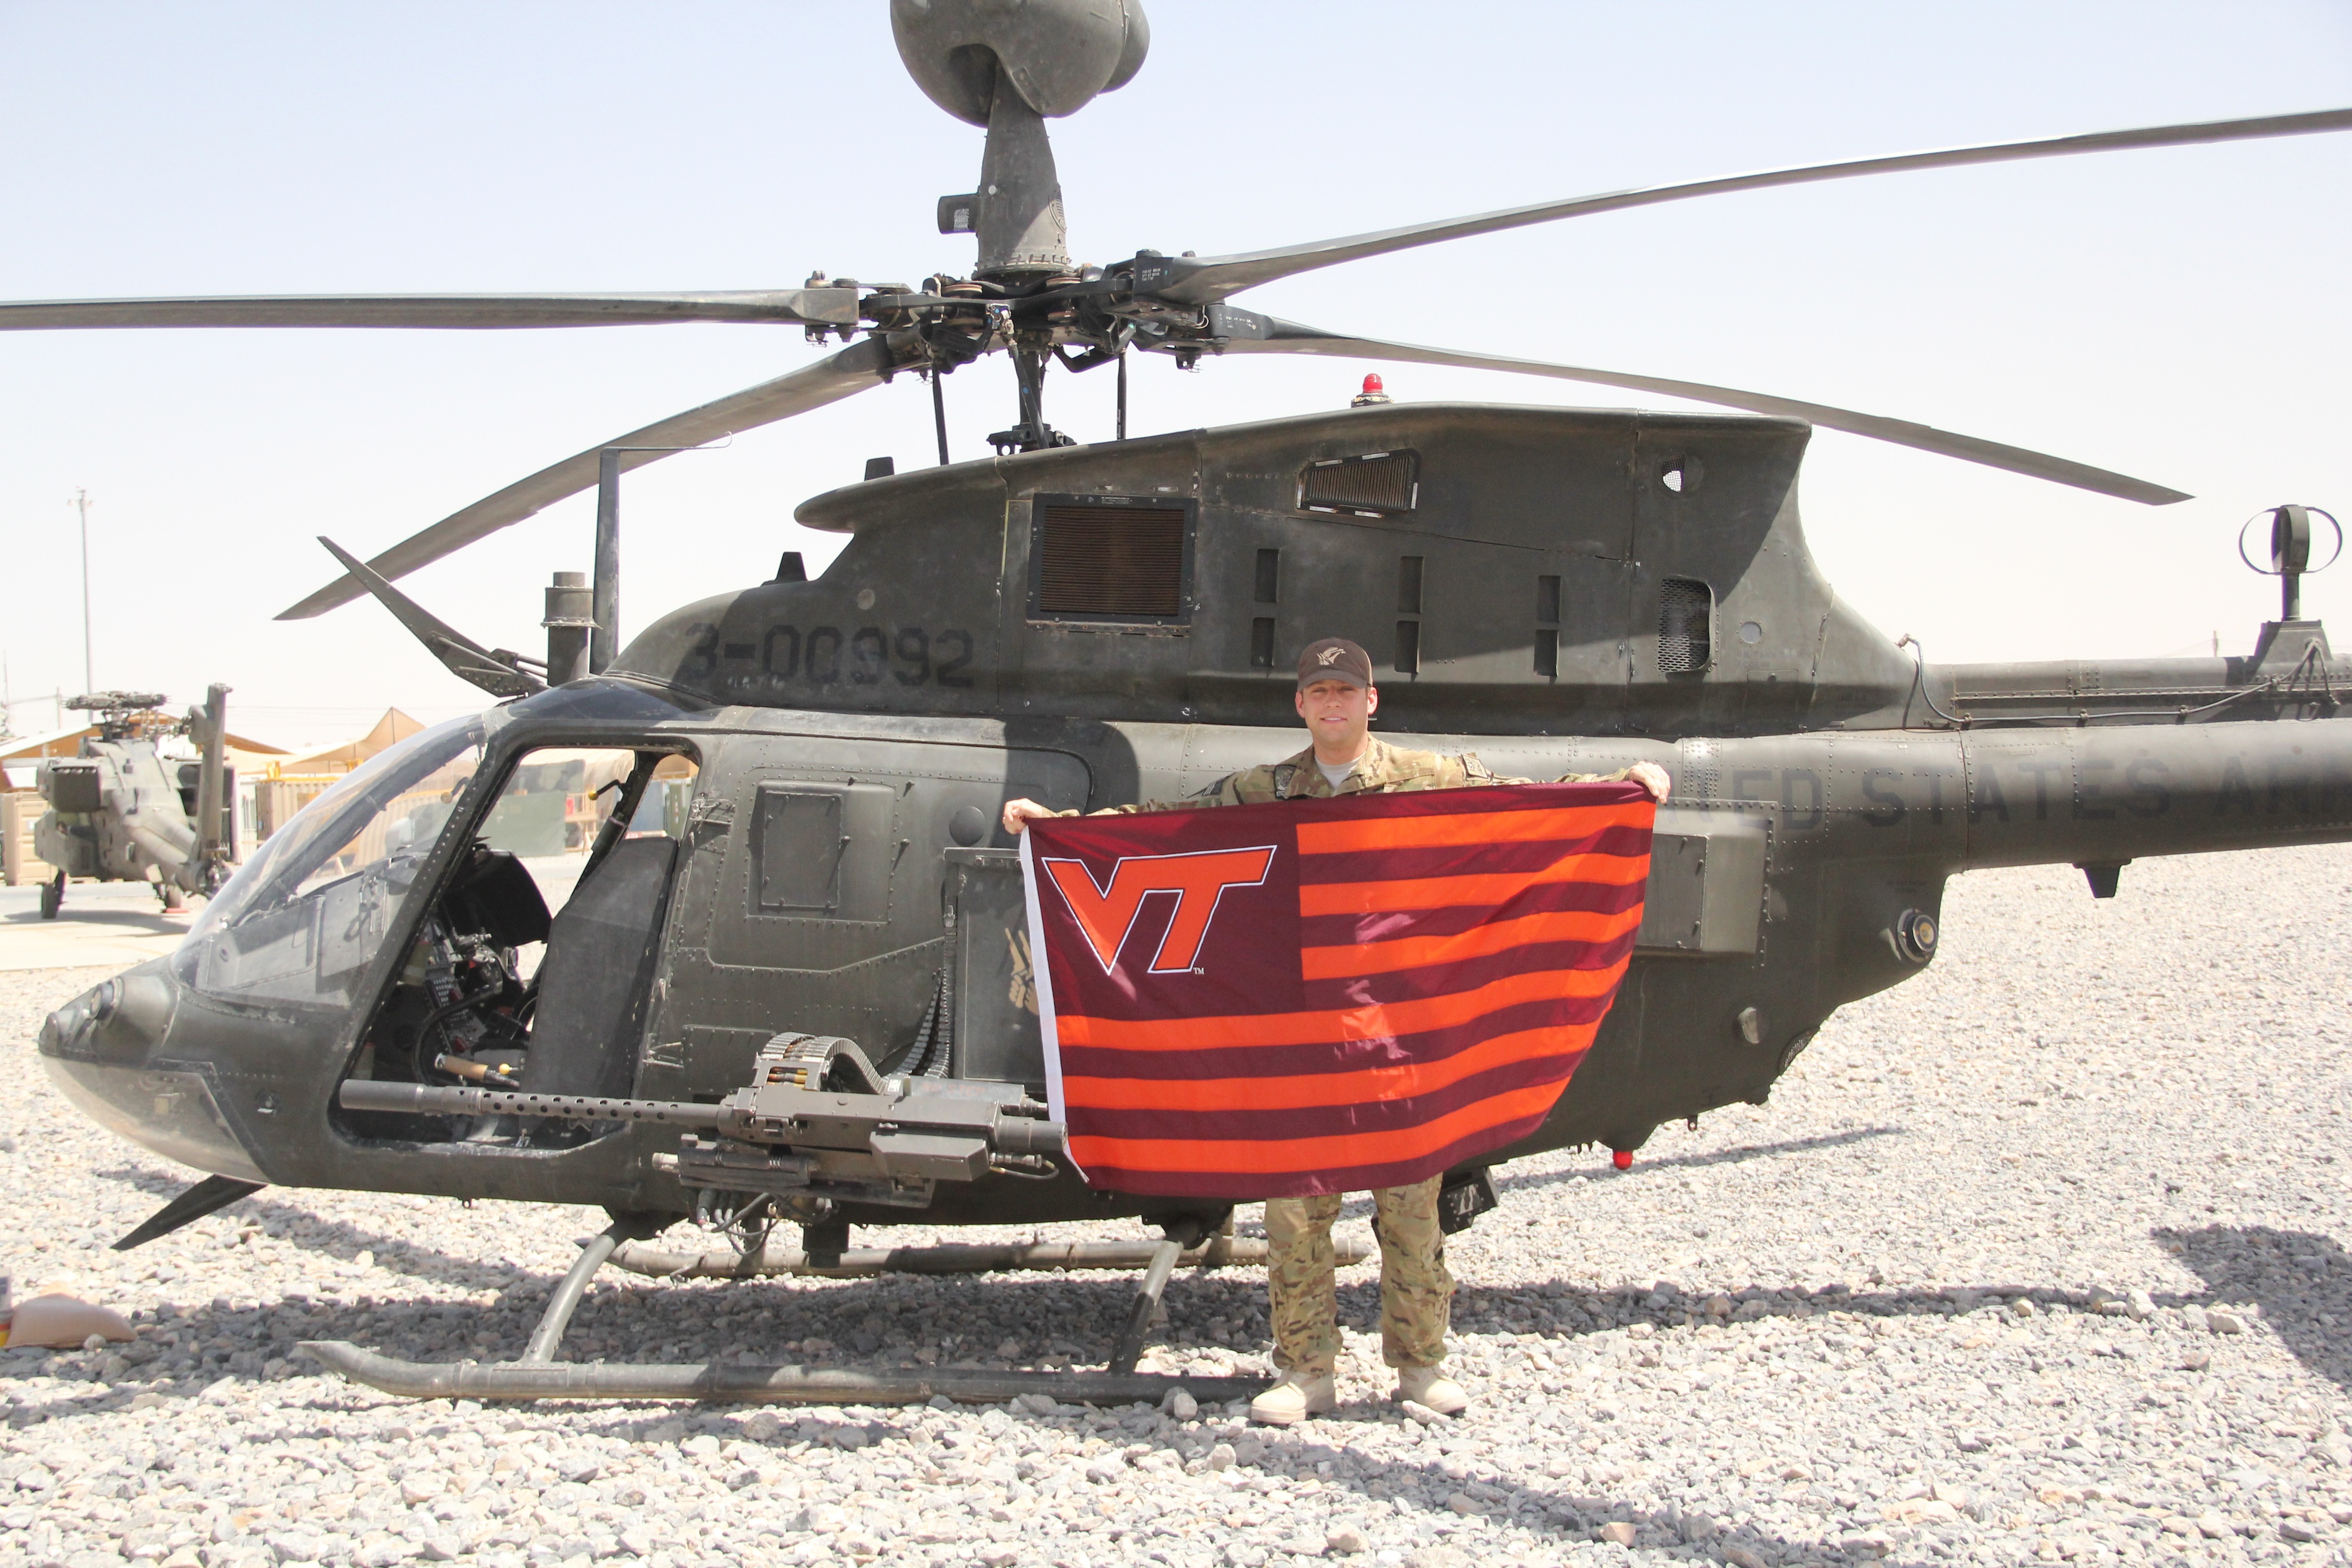 Capt. Andy Howell, U.S. Army, Virginia Tech Corps of Cadets Class of 2007 shown with his helicopter in Afghanistan